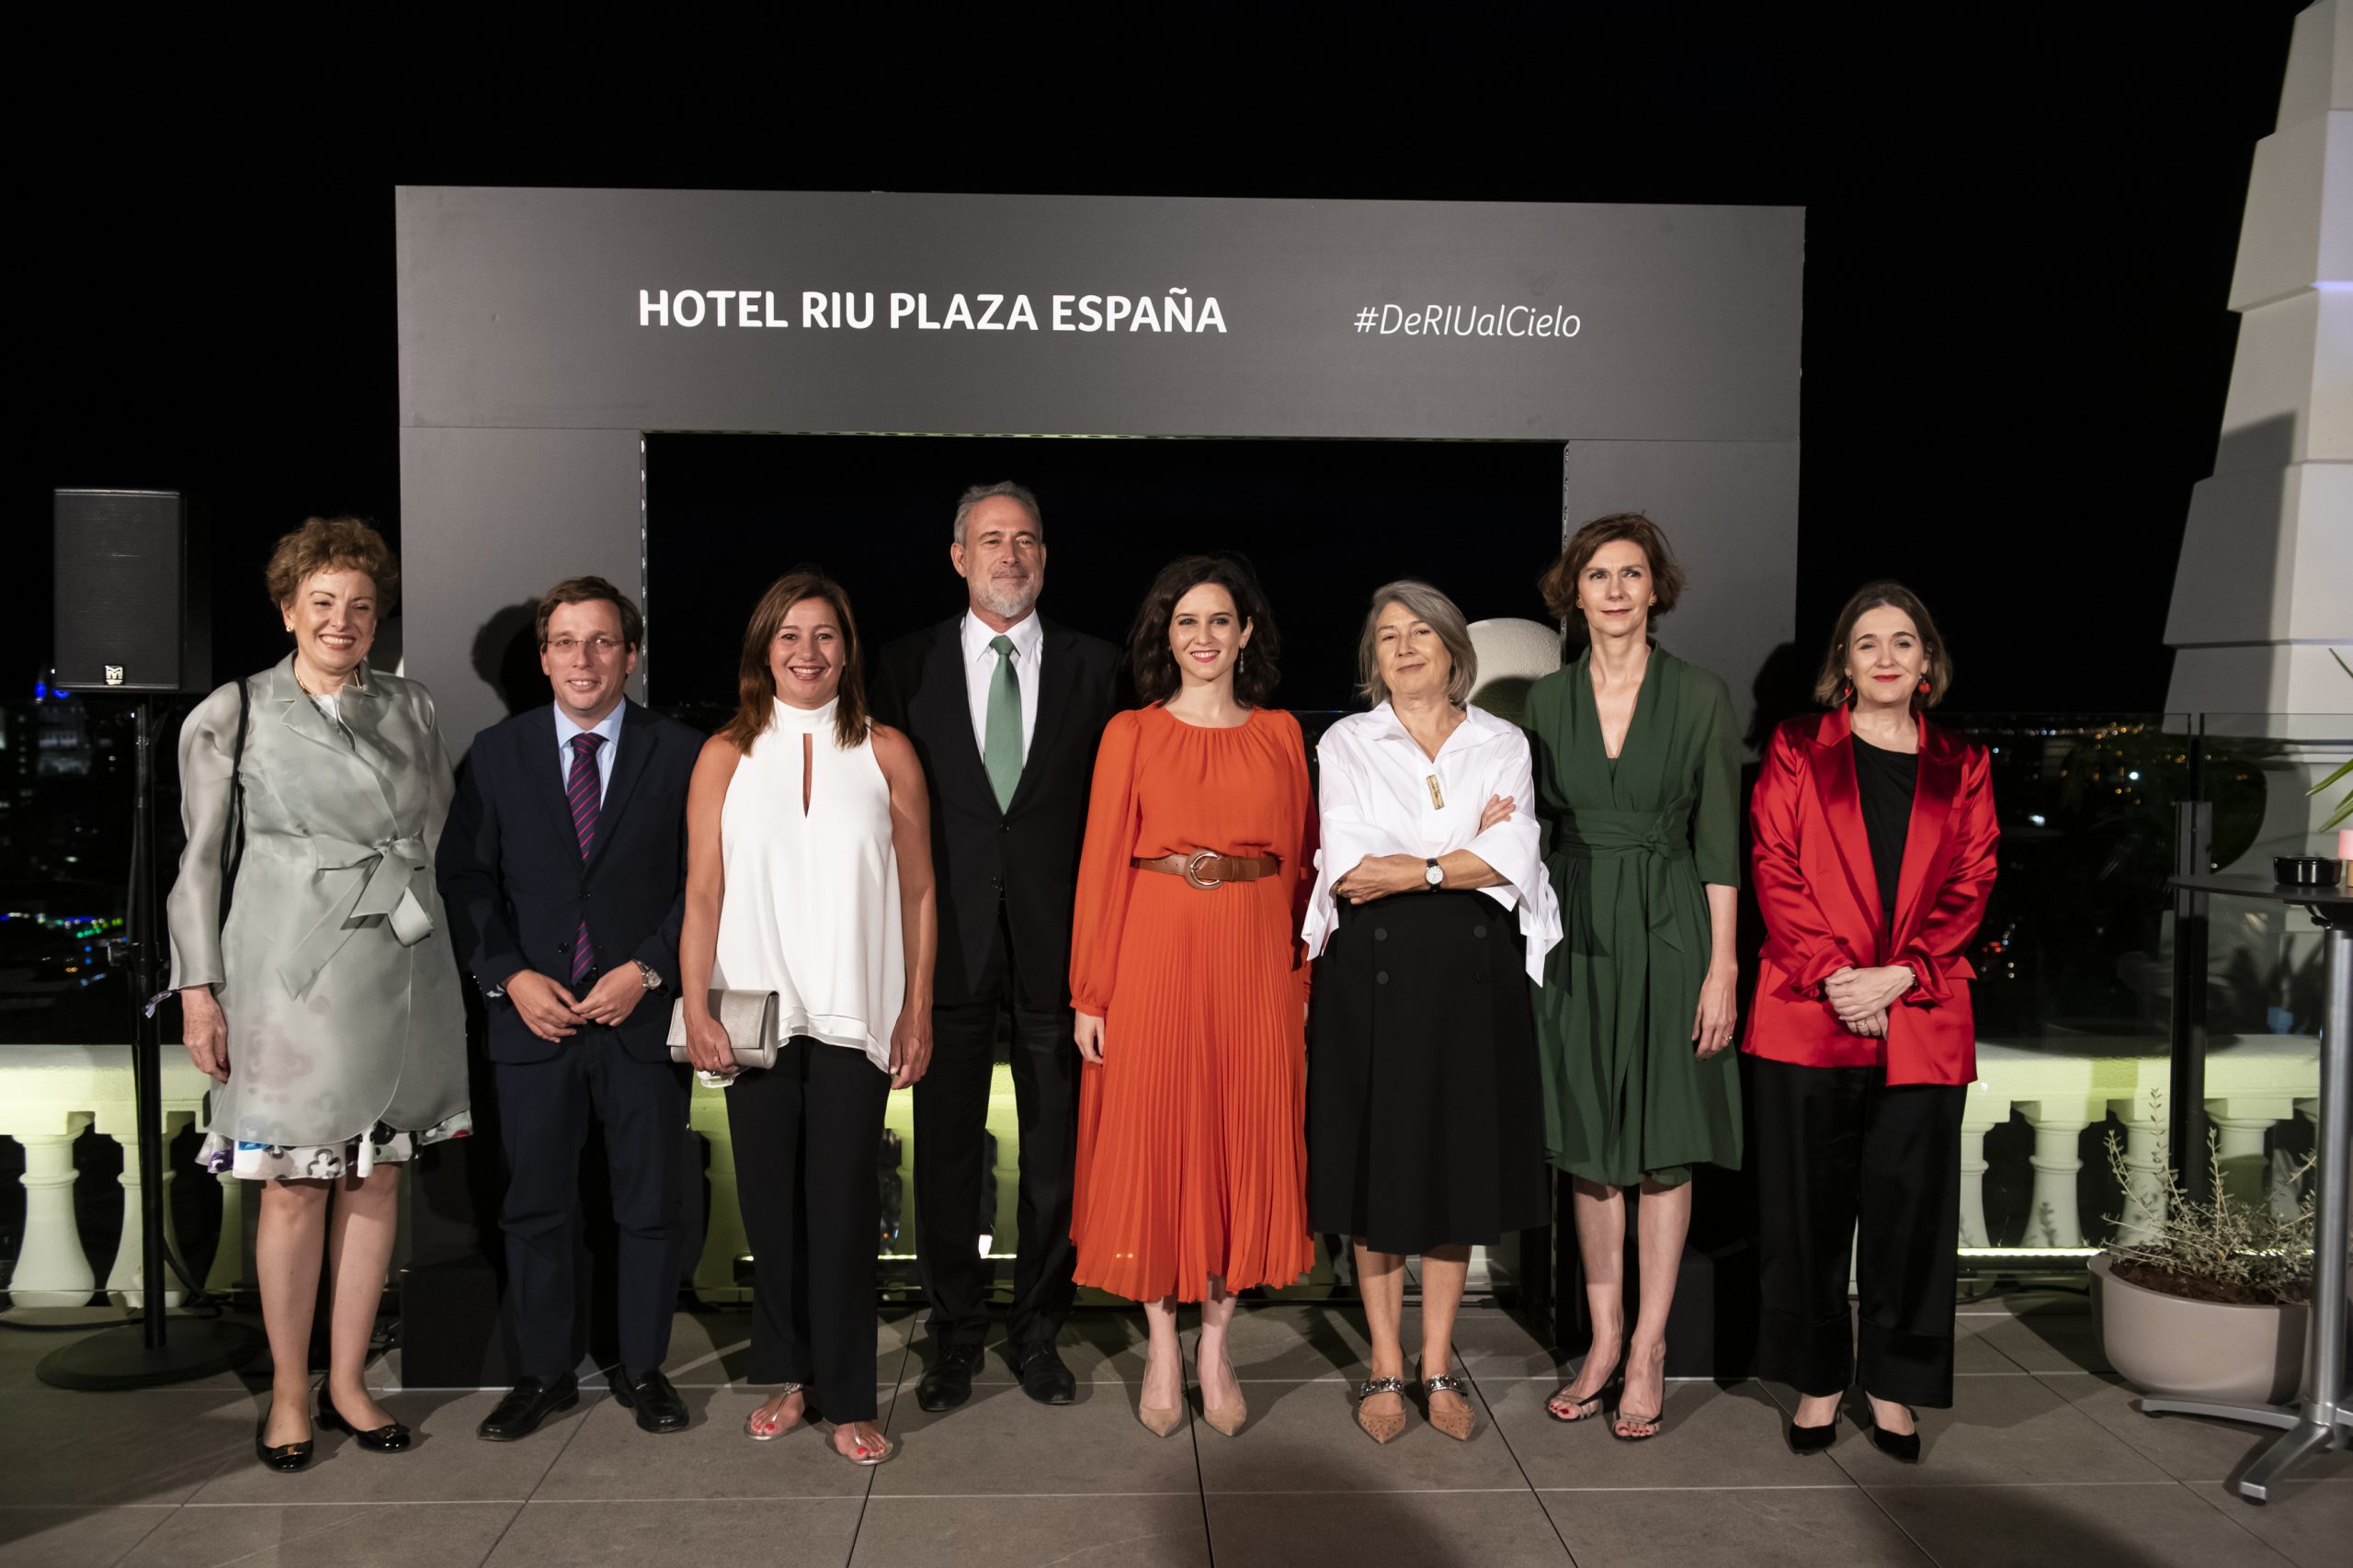 Carmen and Luis Riu pose with the authorities attending the opening party of the Riu Plaza España